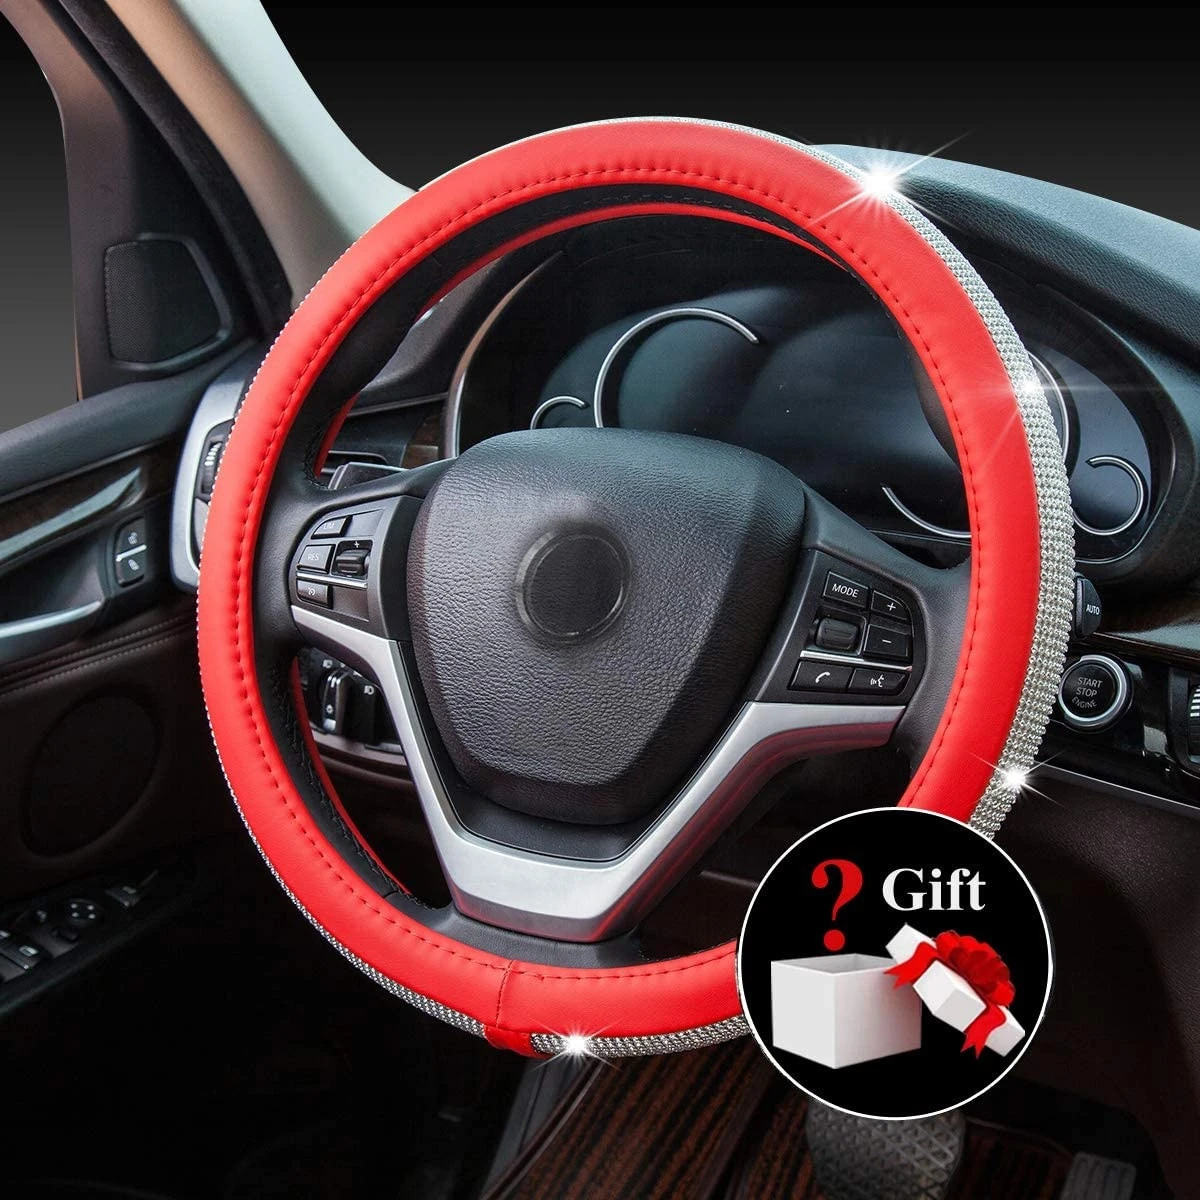 Gutsbox Upgraded Diamond Leather Steering Wheel Cover with Bling Bling Crystal Rhinestones